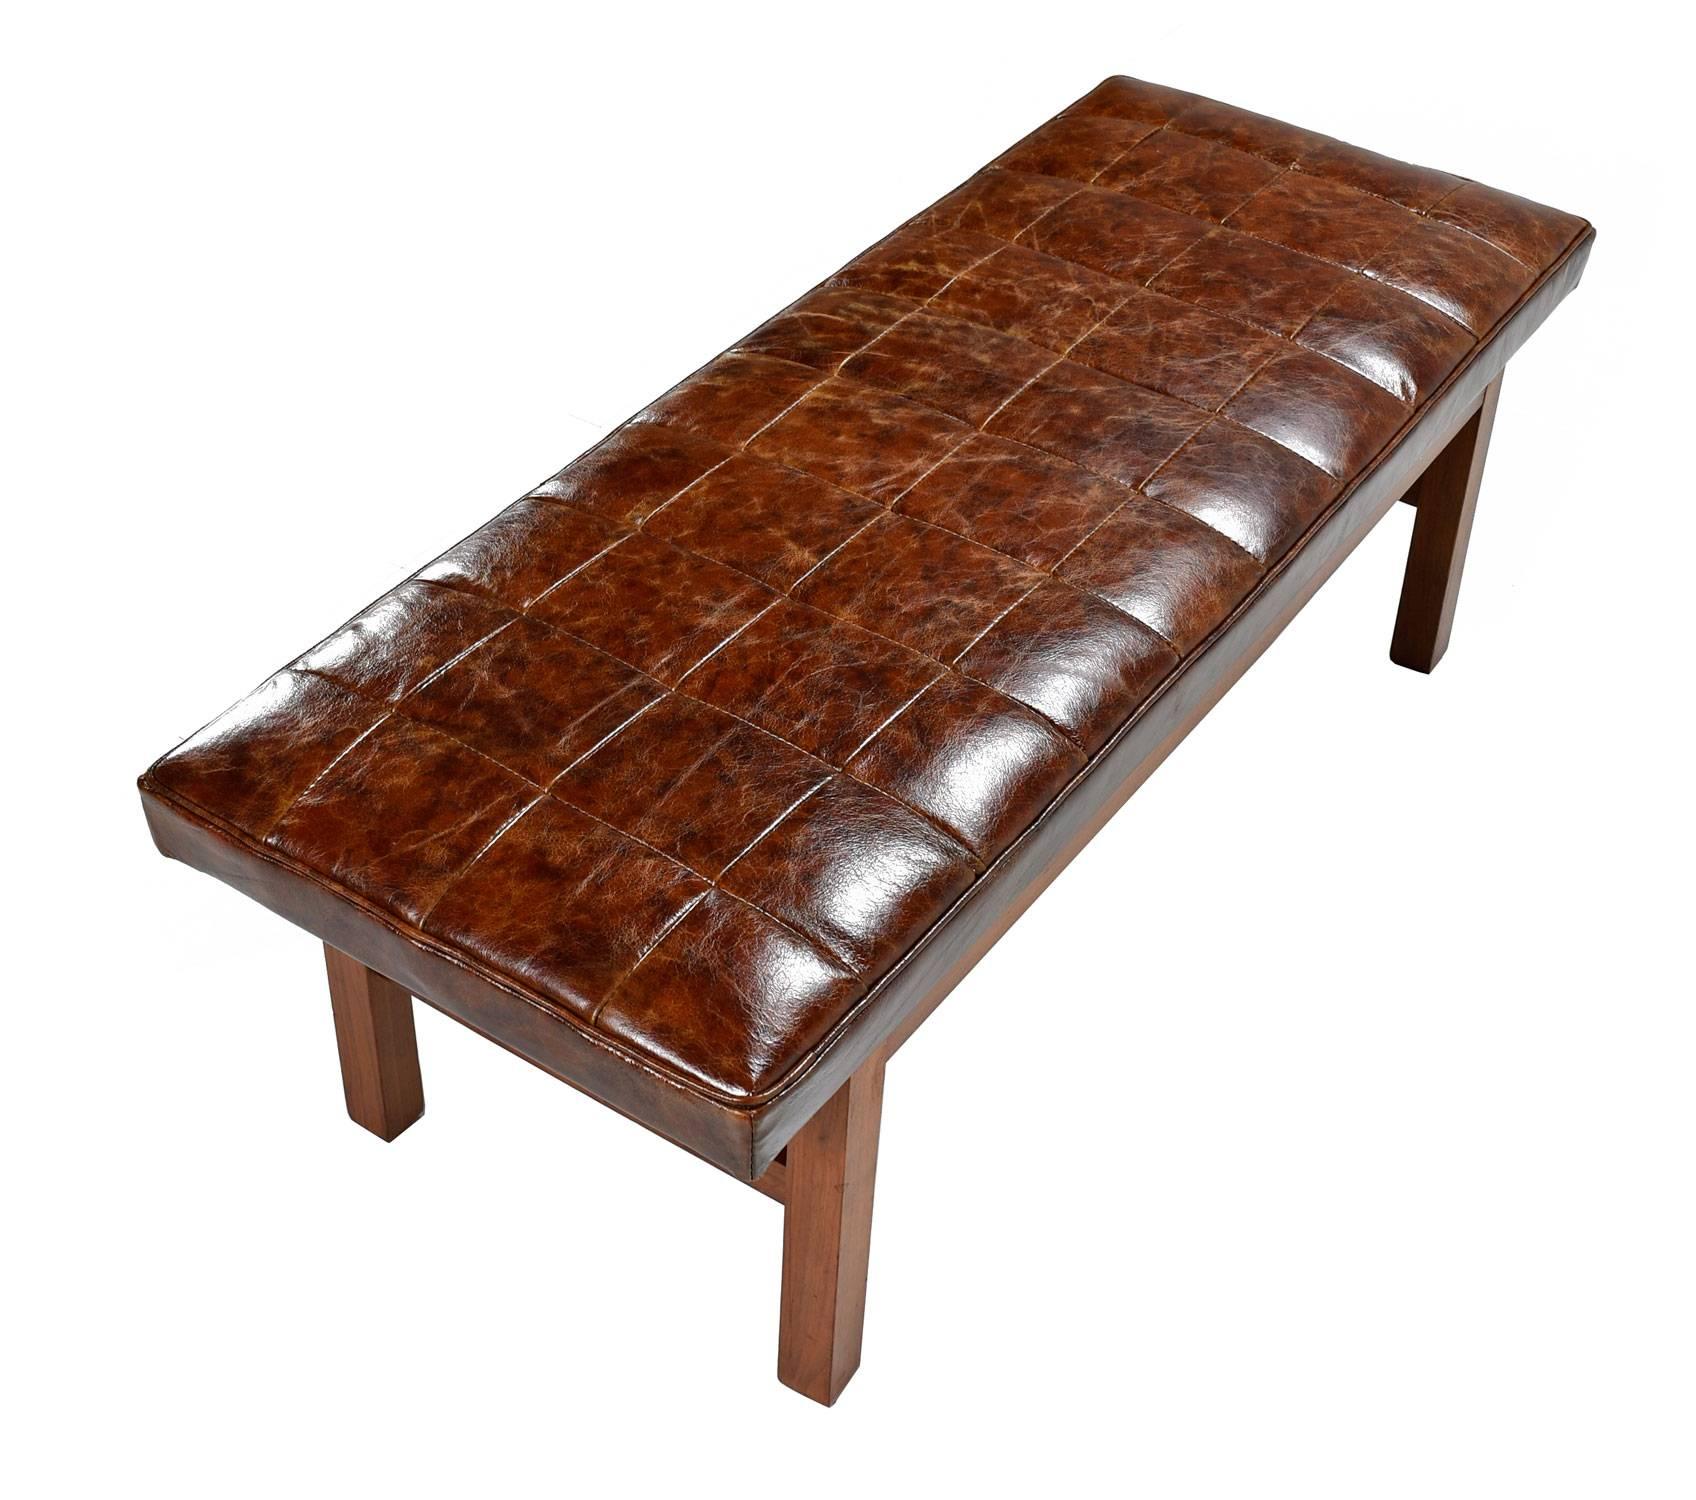 Mid-Century Modern Jens Risom style bench outfitted with new distressed leather upholstery. The quilted pattern adds an heir of esteem to the rich authentic leather hide. The frame is solid walnut wood, American made, vintage 1950s.